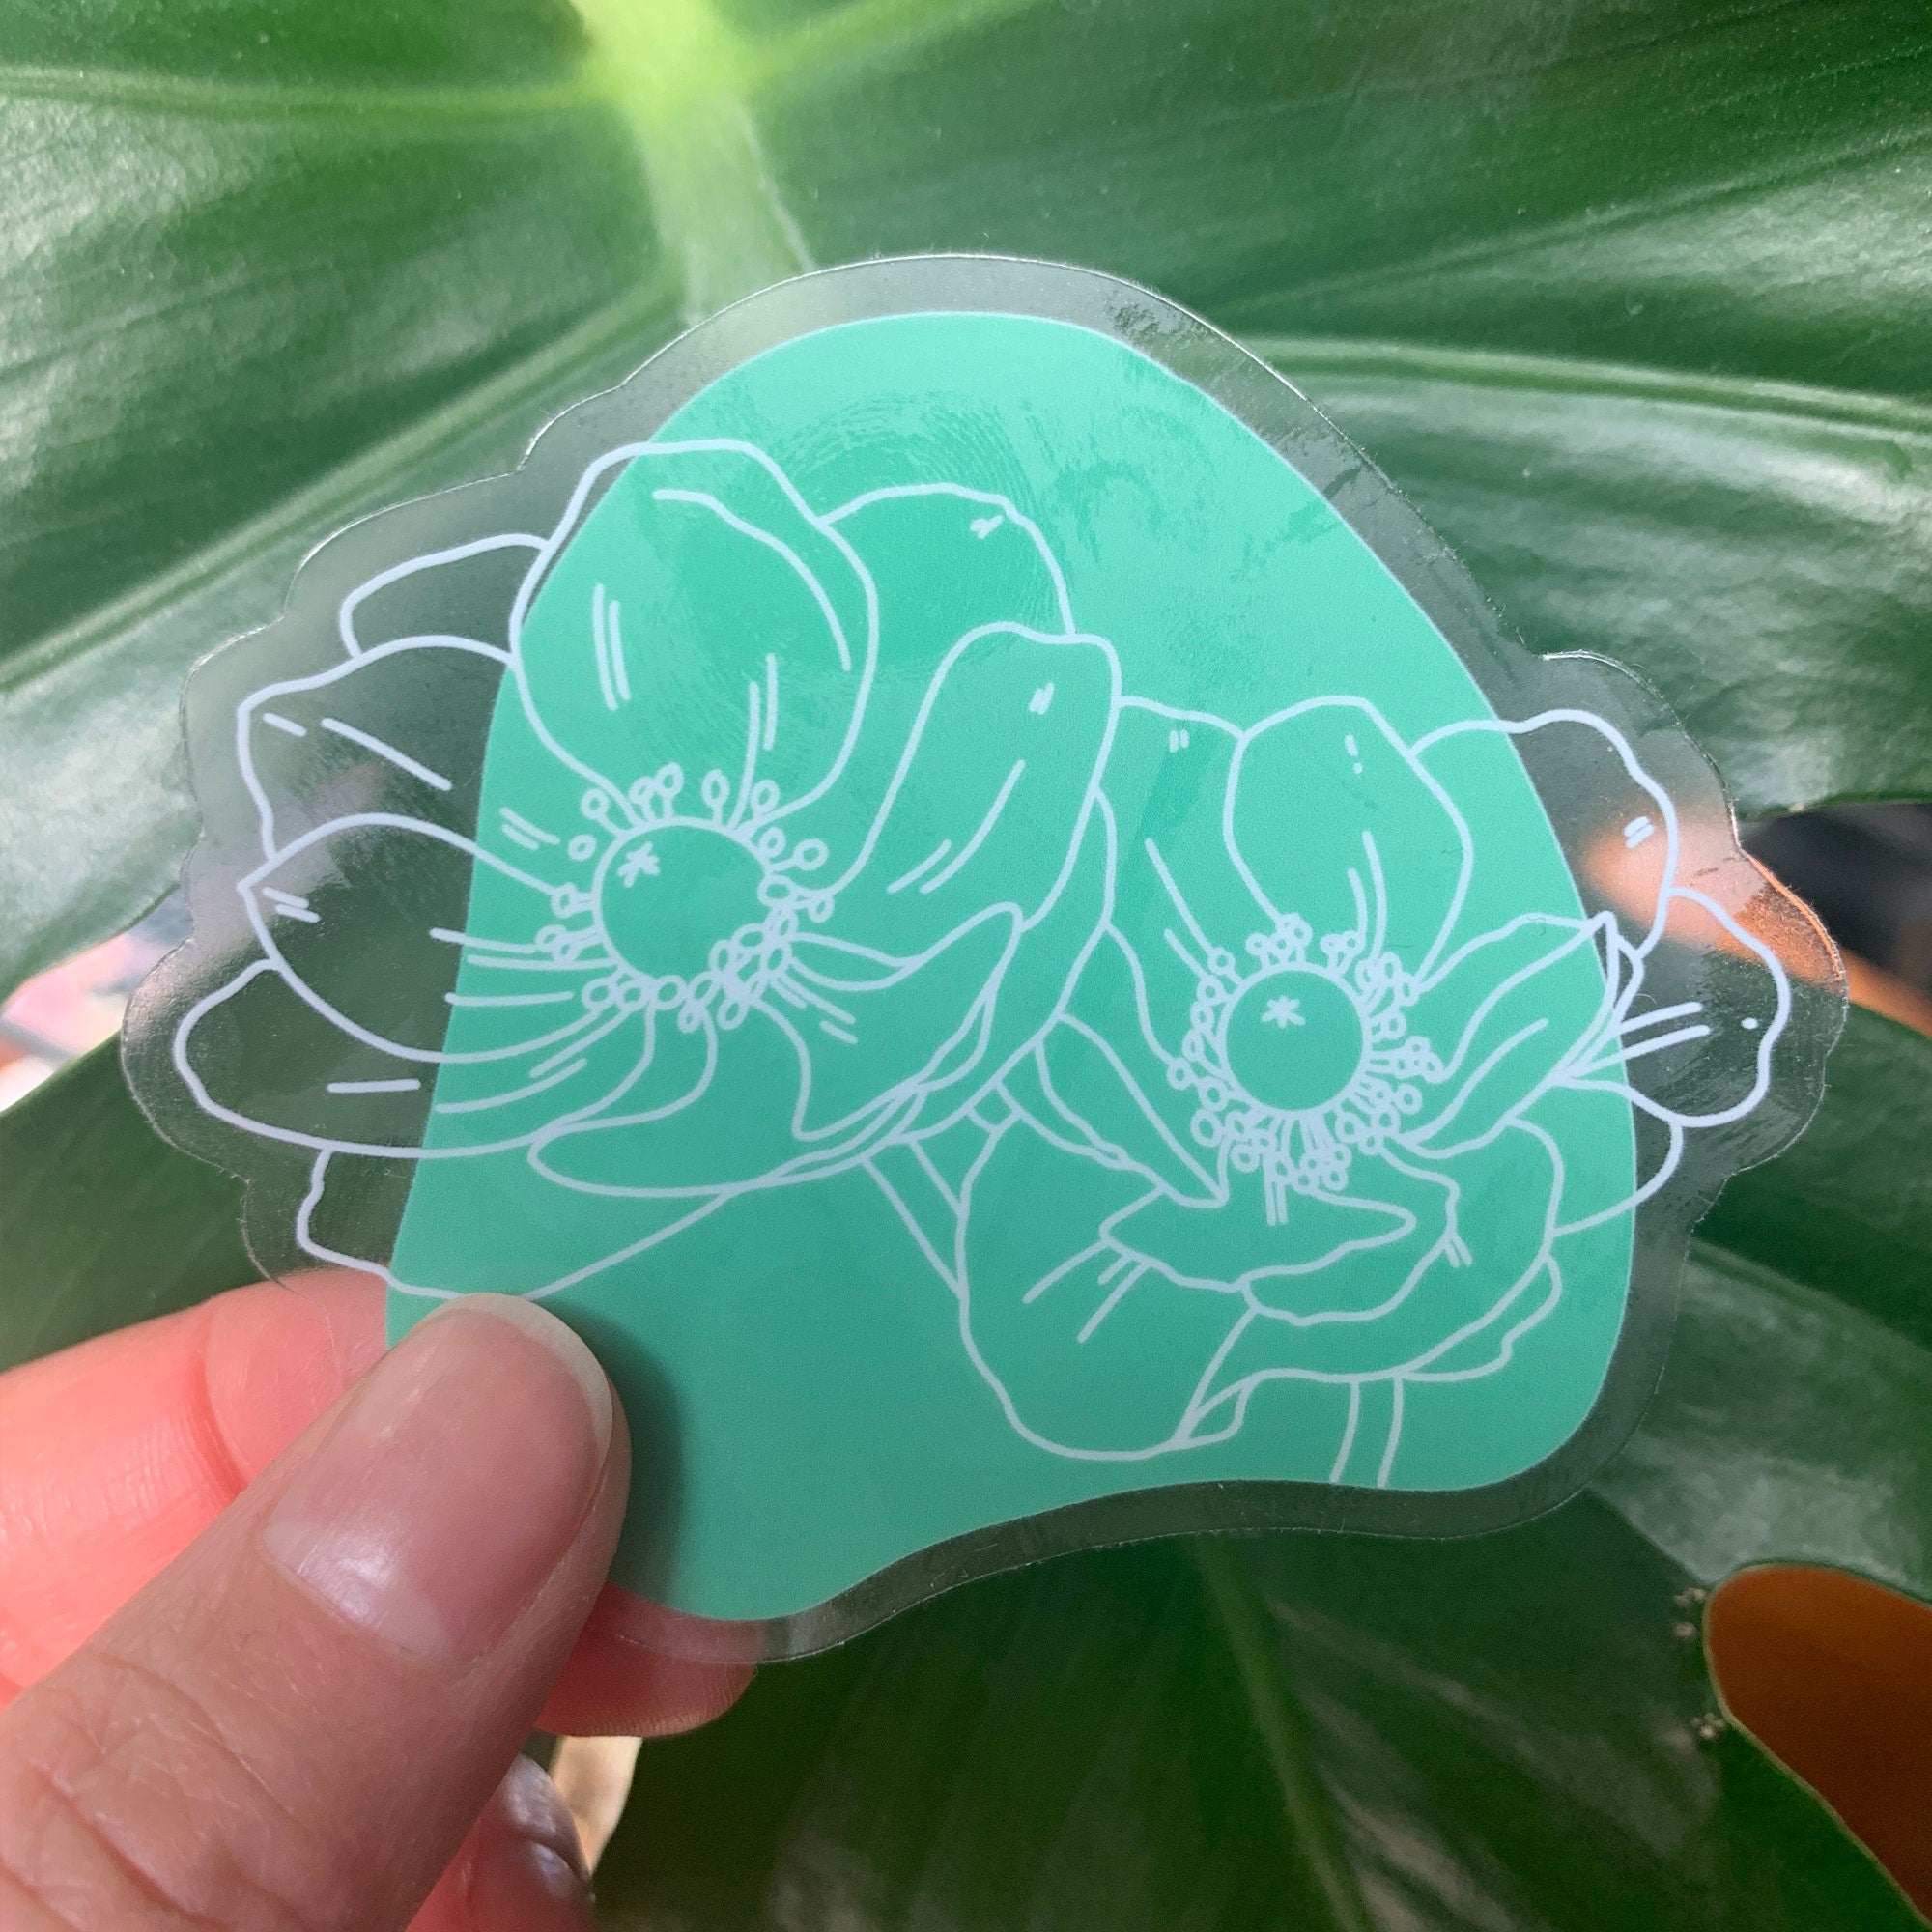 Teal Anemone Flower 3" Clear Background Vinyl Sticker for Water Bottles, Laptops, Phone Cases, & More **FREE USA SHIPPING**